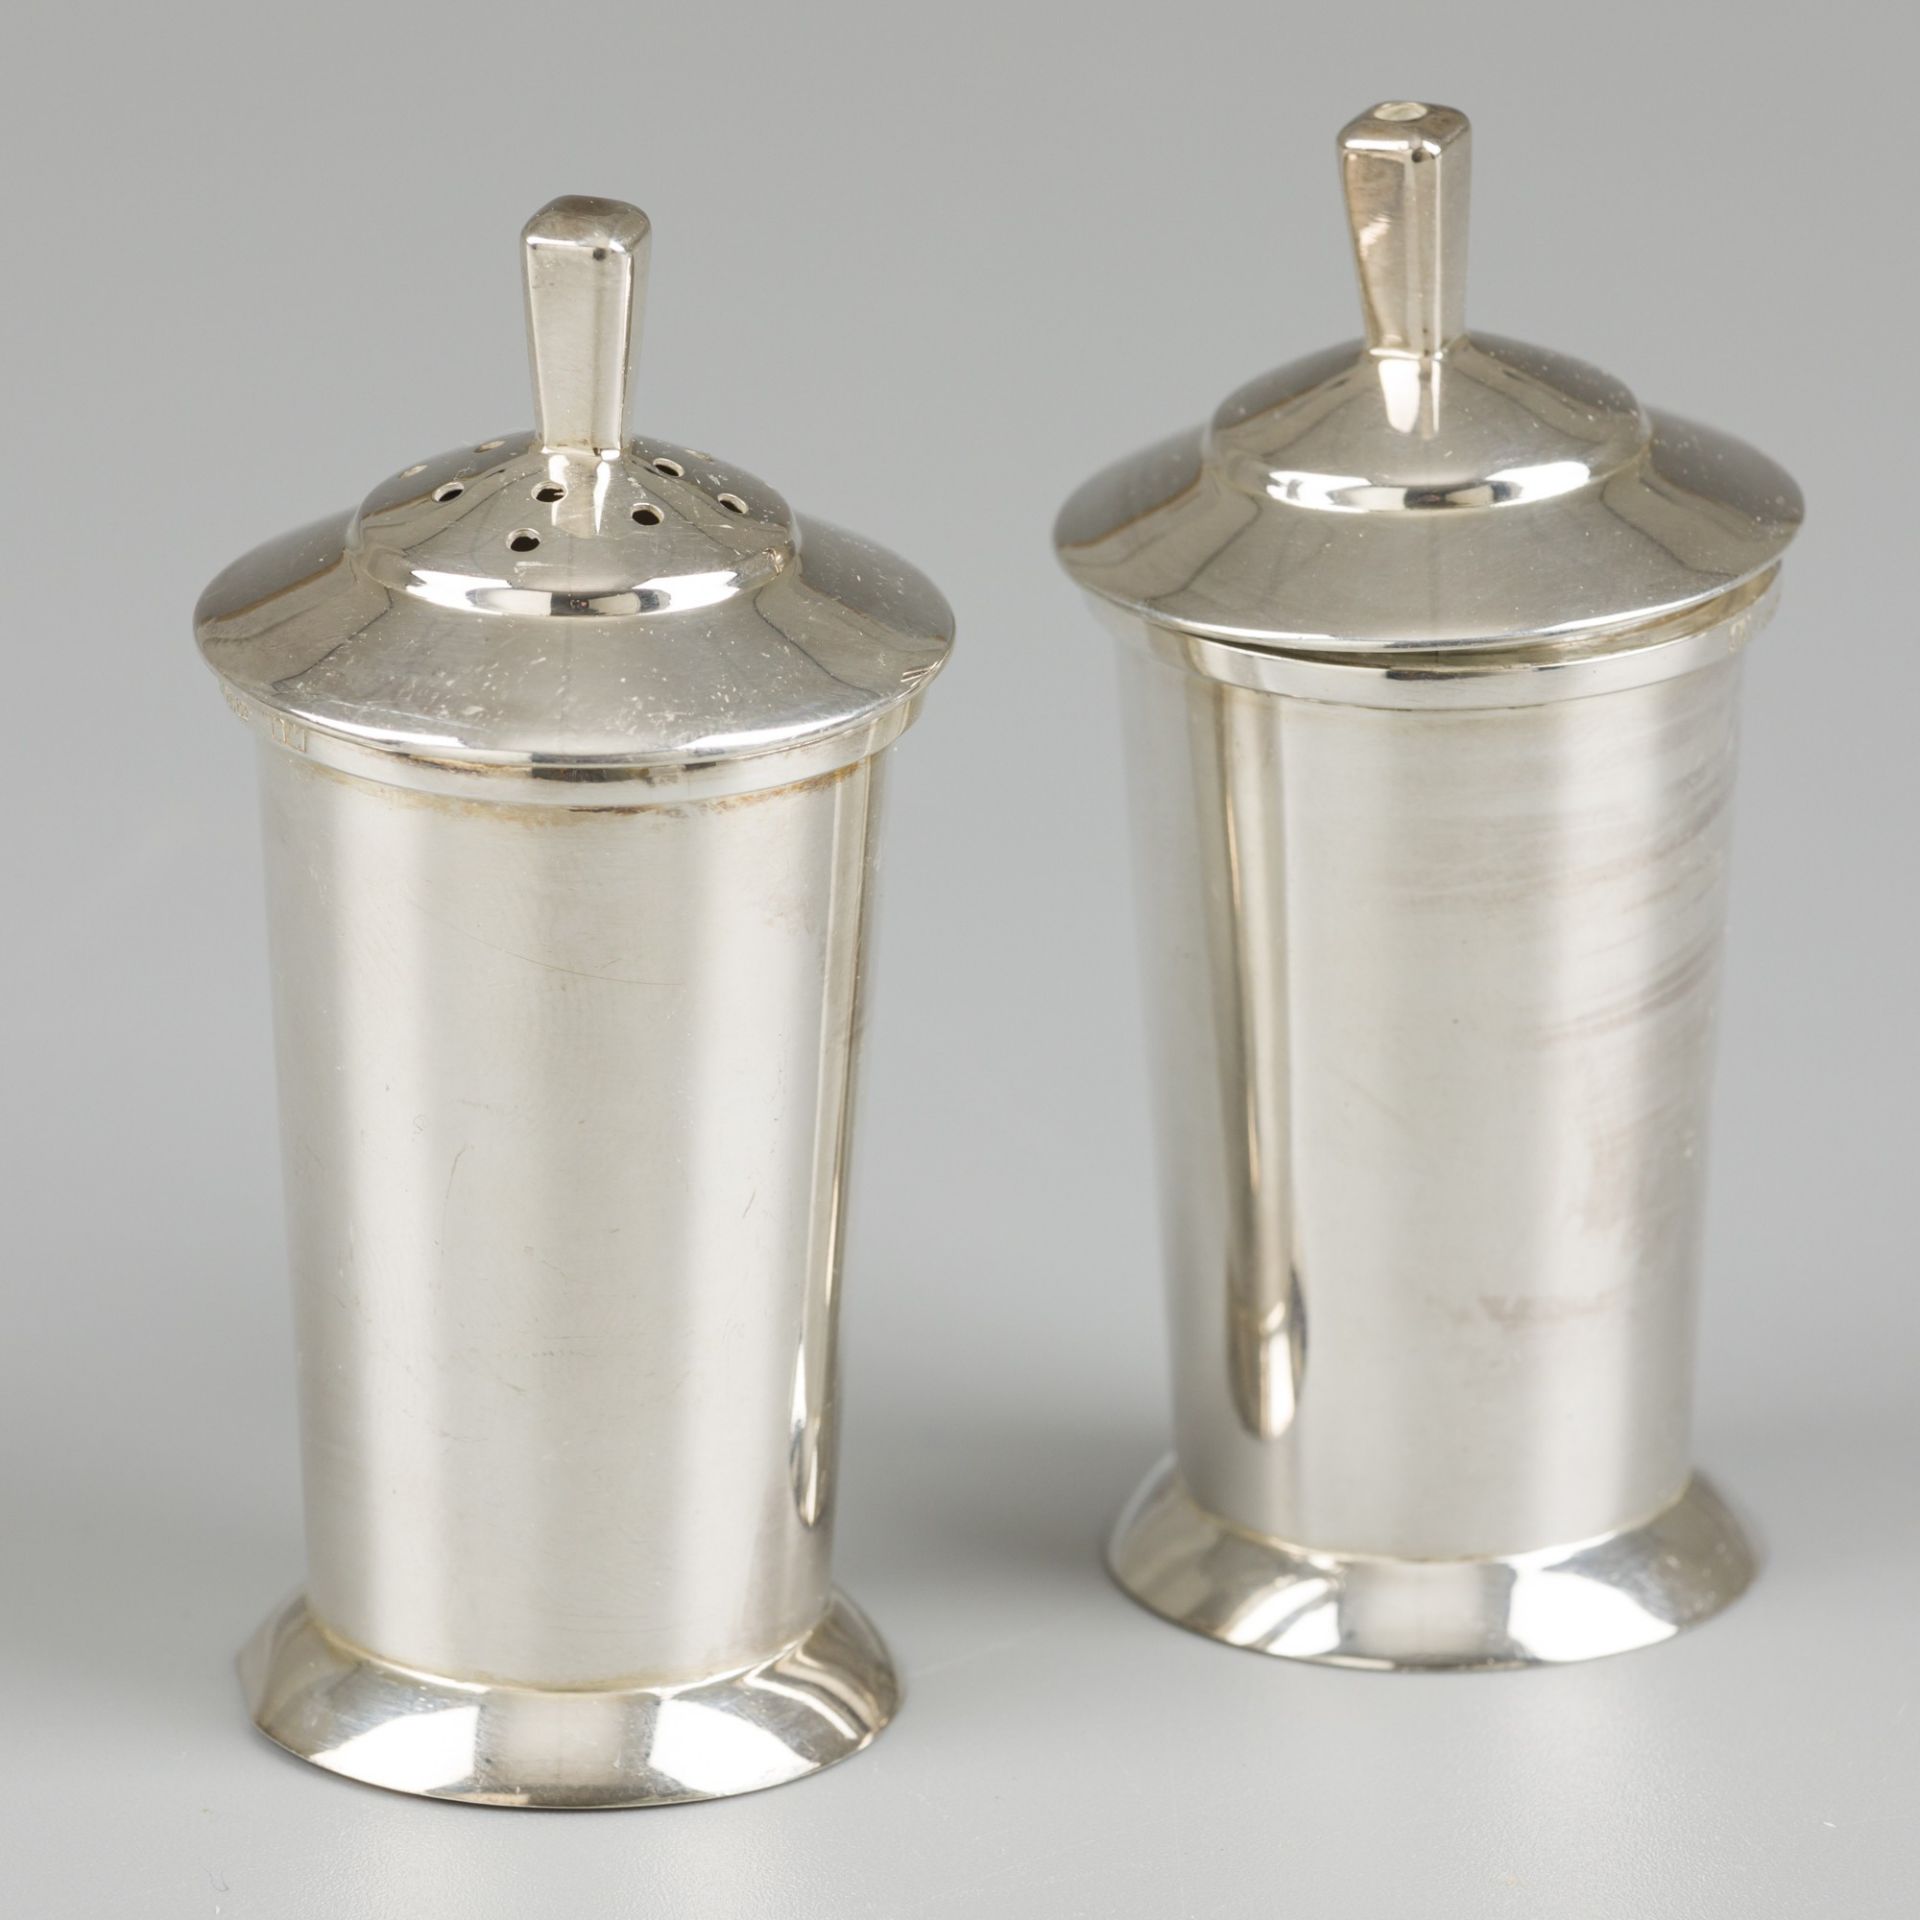 Pepper and salt shakers, silver.